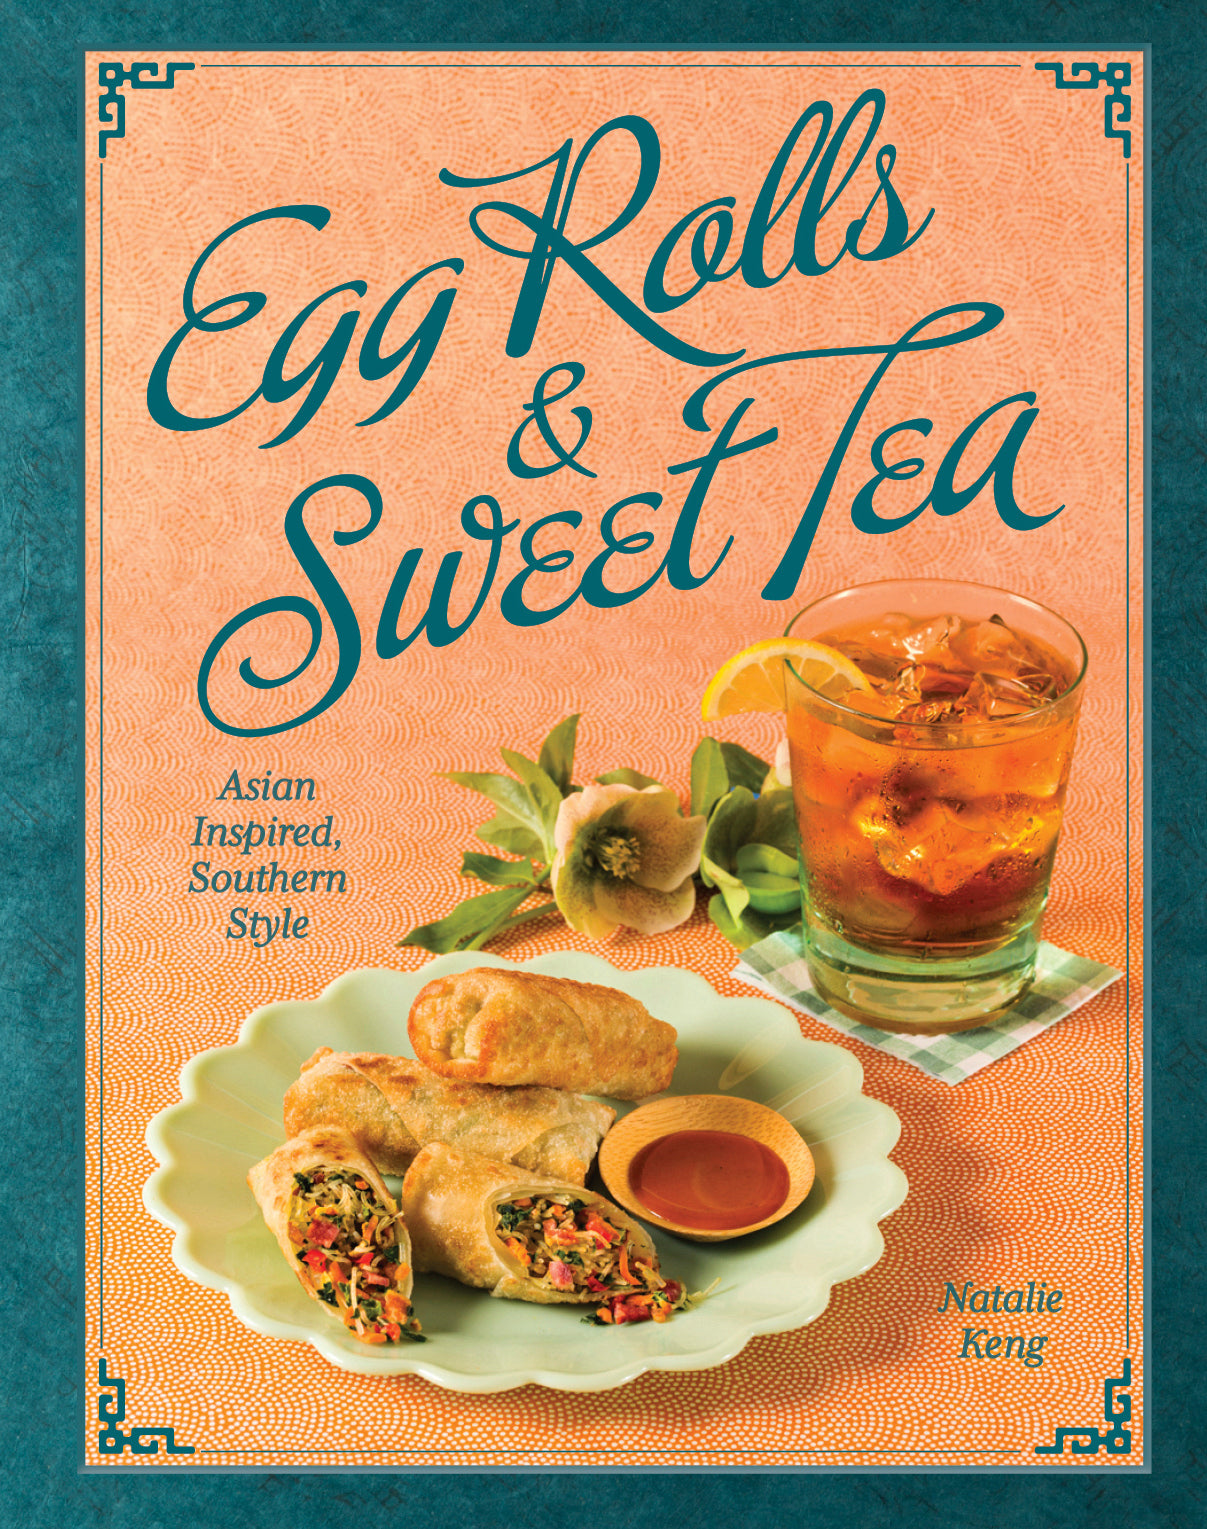 Egg Rolls & Sweet Tea: Asian Inspired, Southern Style by Natalie Keng